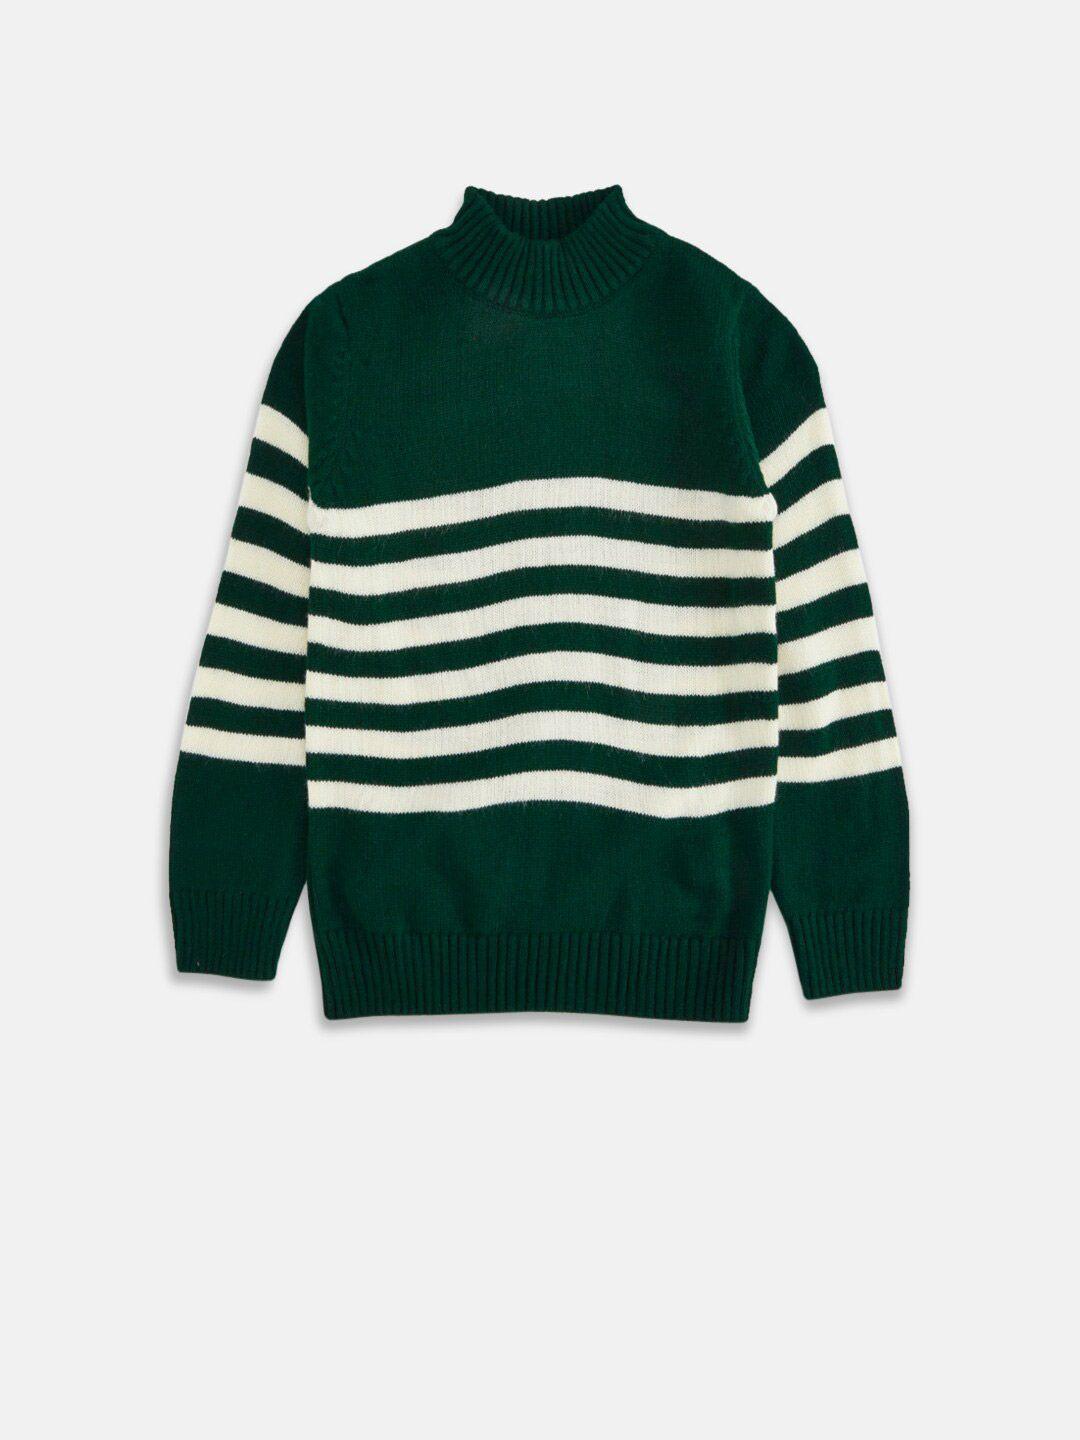 pantaloons junior boys olive green & white striped acrylic pullover